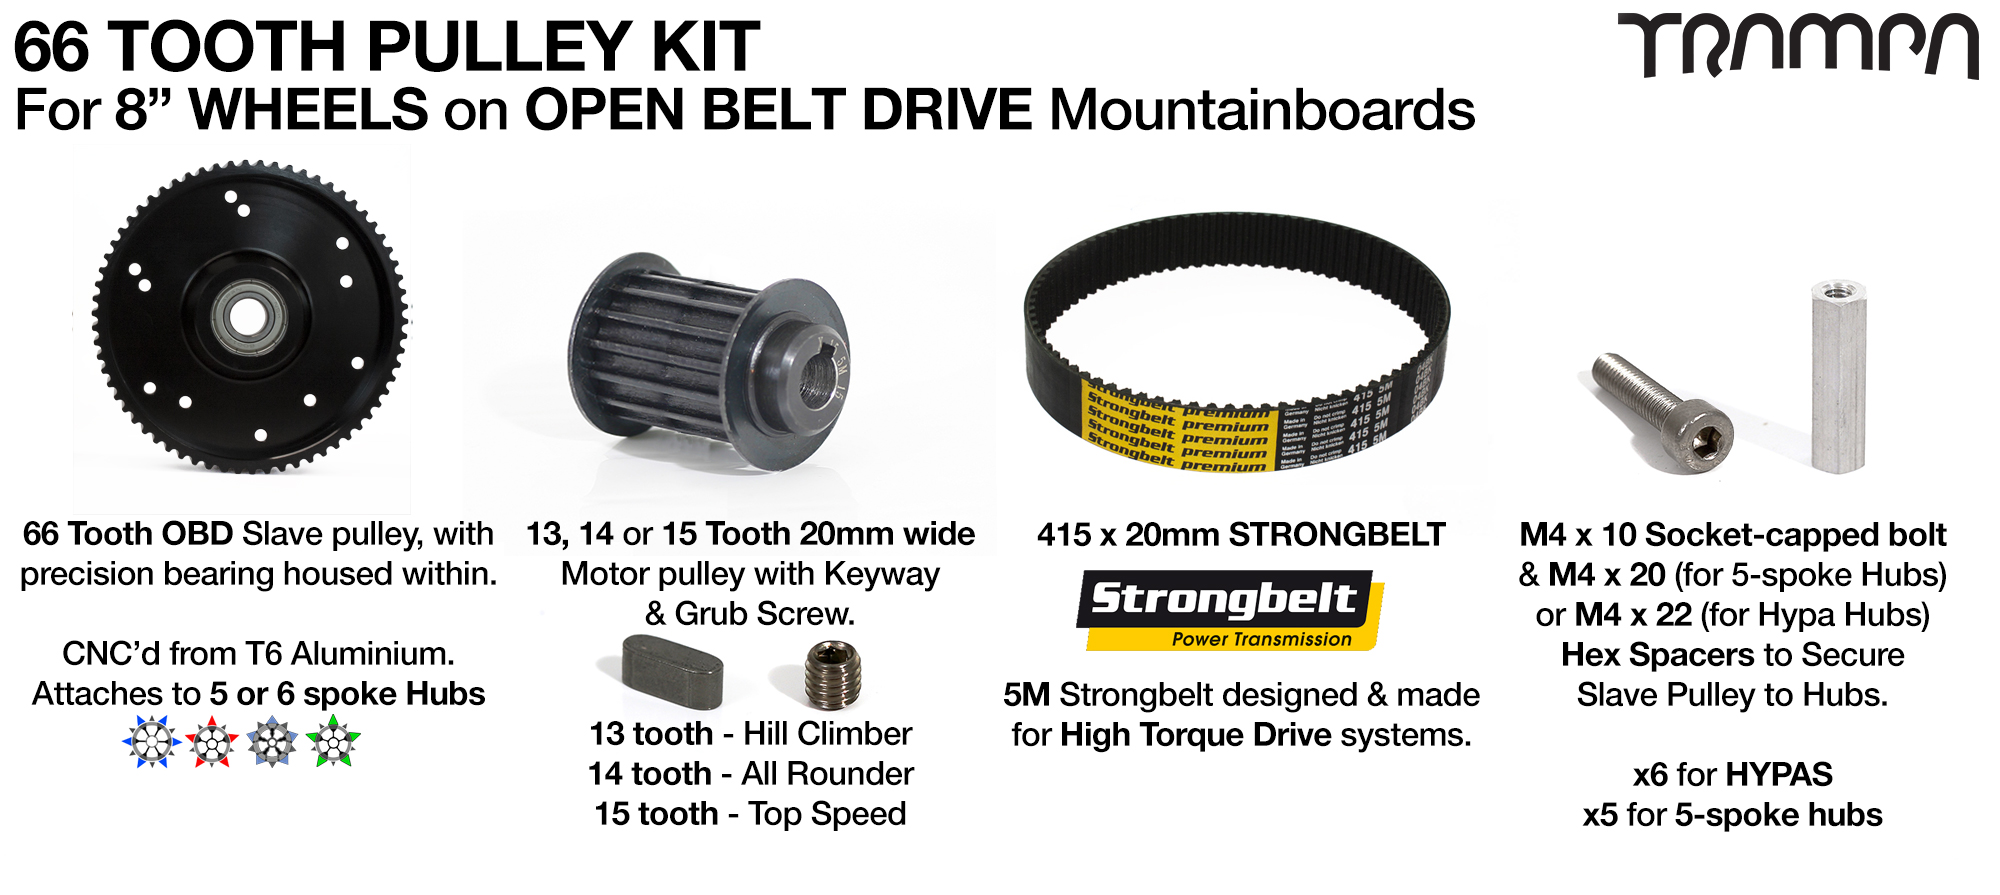 66T OBD Panel with 8 Inch Wheels - 66 Tooth Pulley kit & 415 x 20mm Belt 